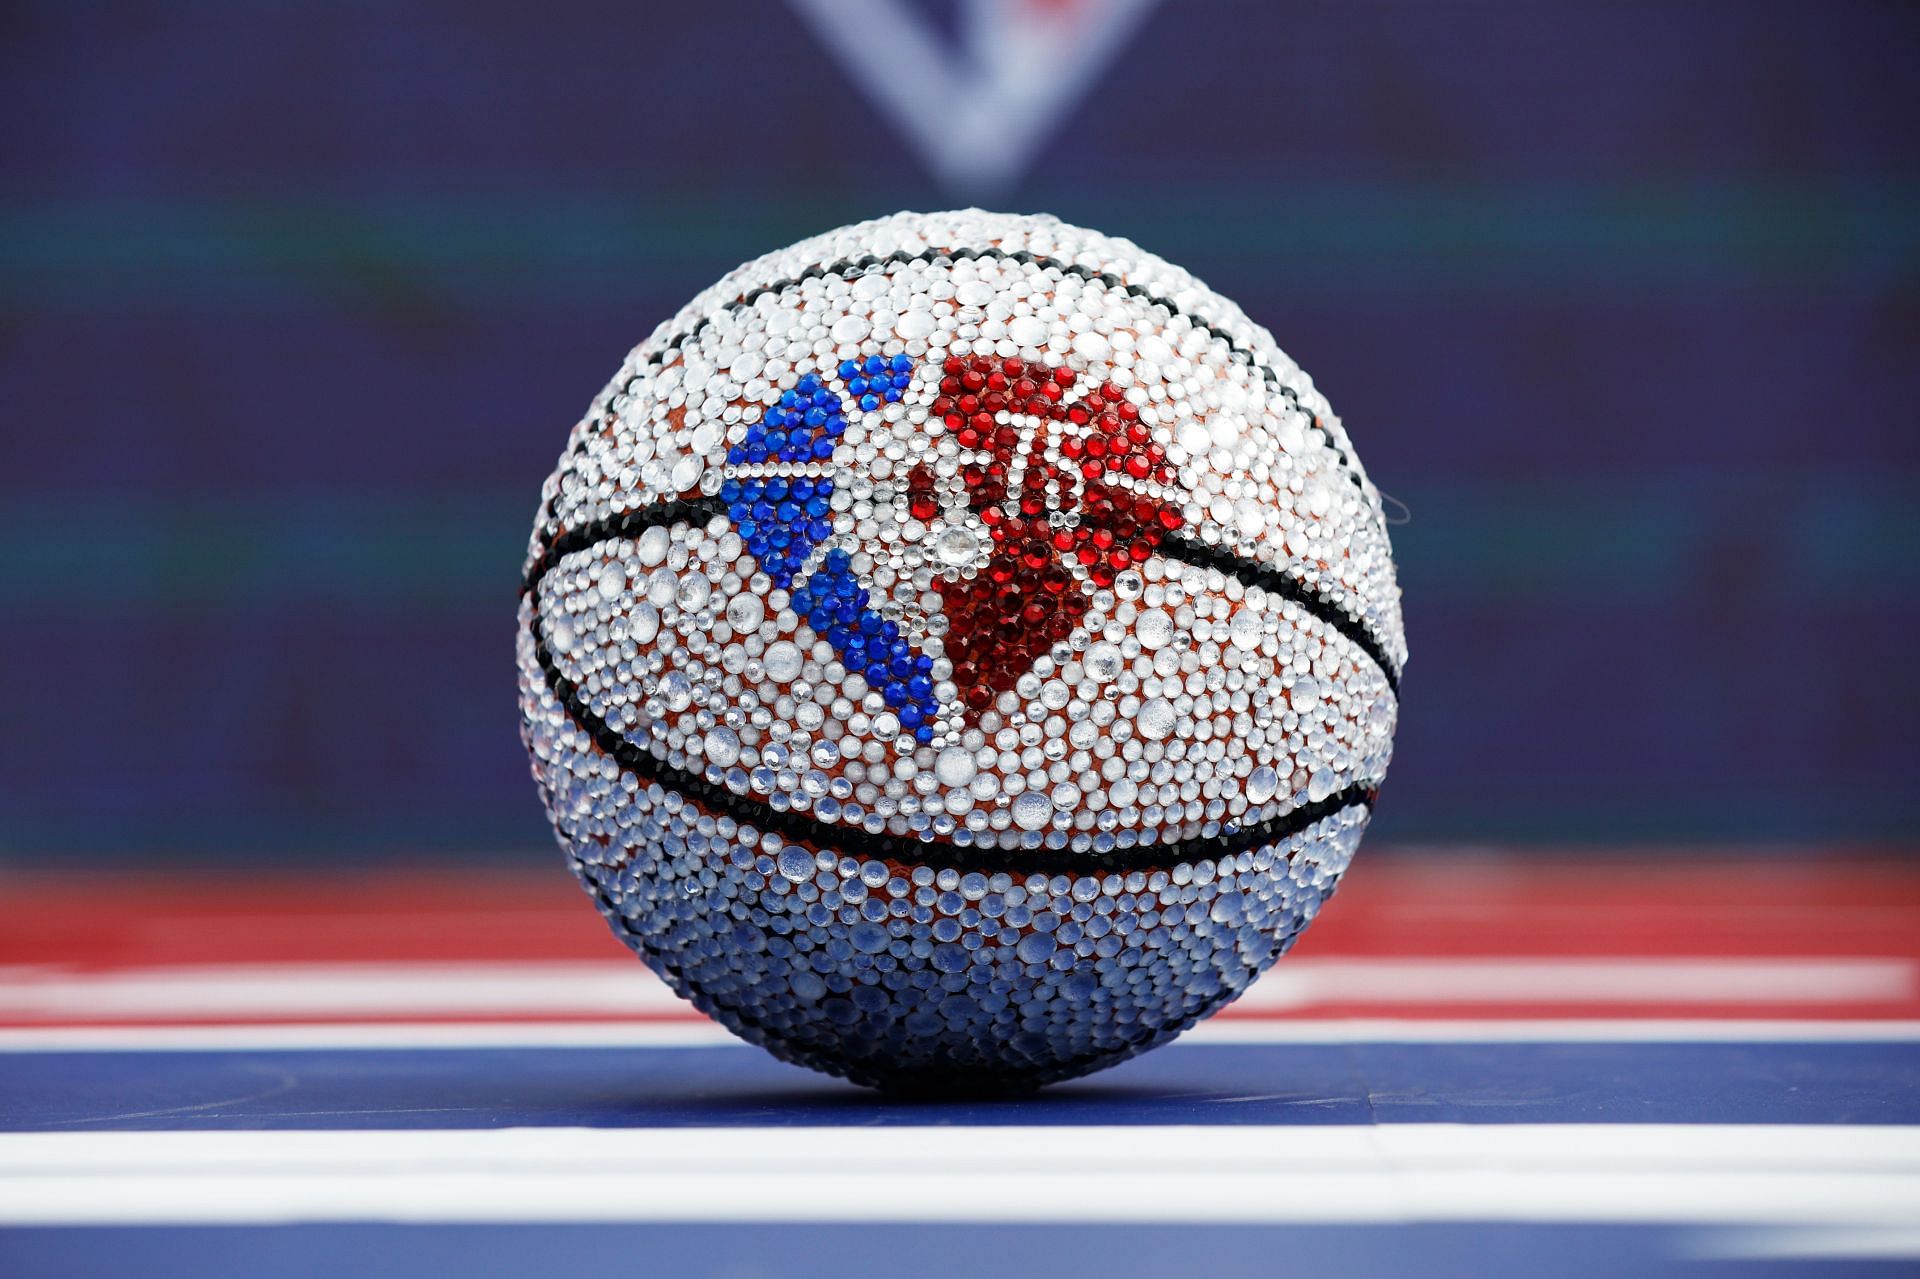 A jewel encrusted basketball with NBA 75th anniversary detail is pictured.